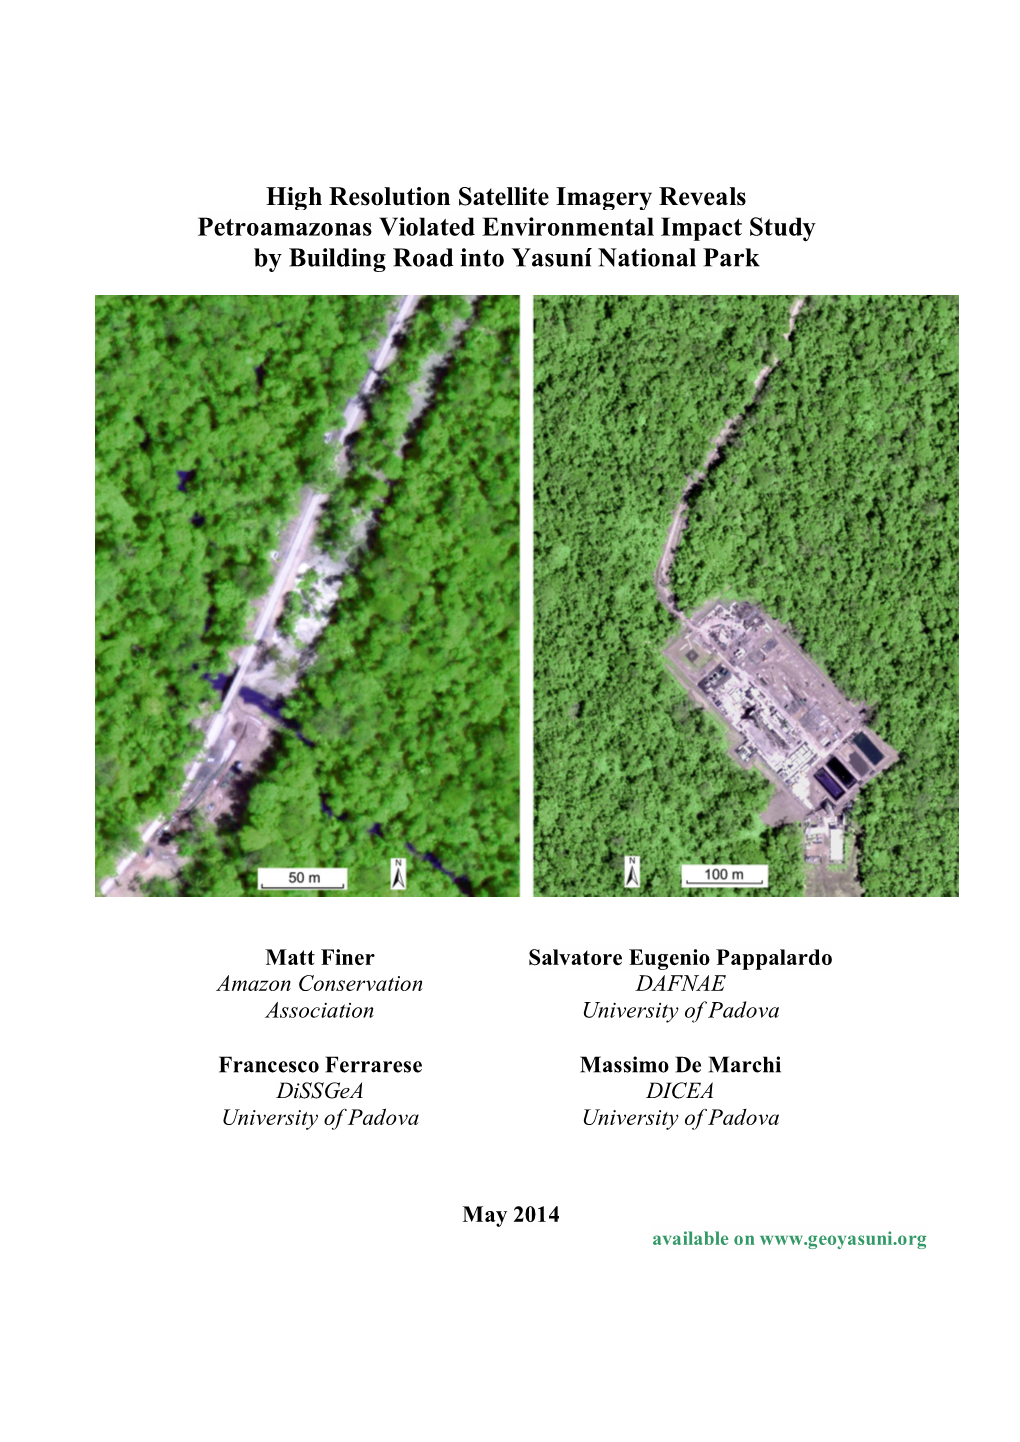 High Resolution Satellite Imagery Reveals Petroamazonas Violated Environmental Impact Study by Building Road Into Yasuní National Park